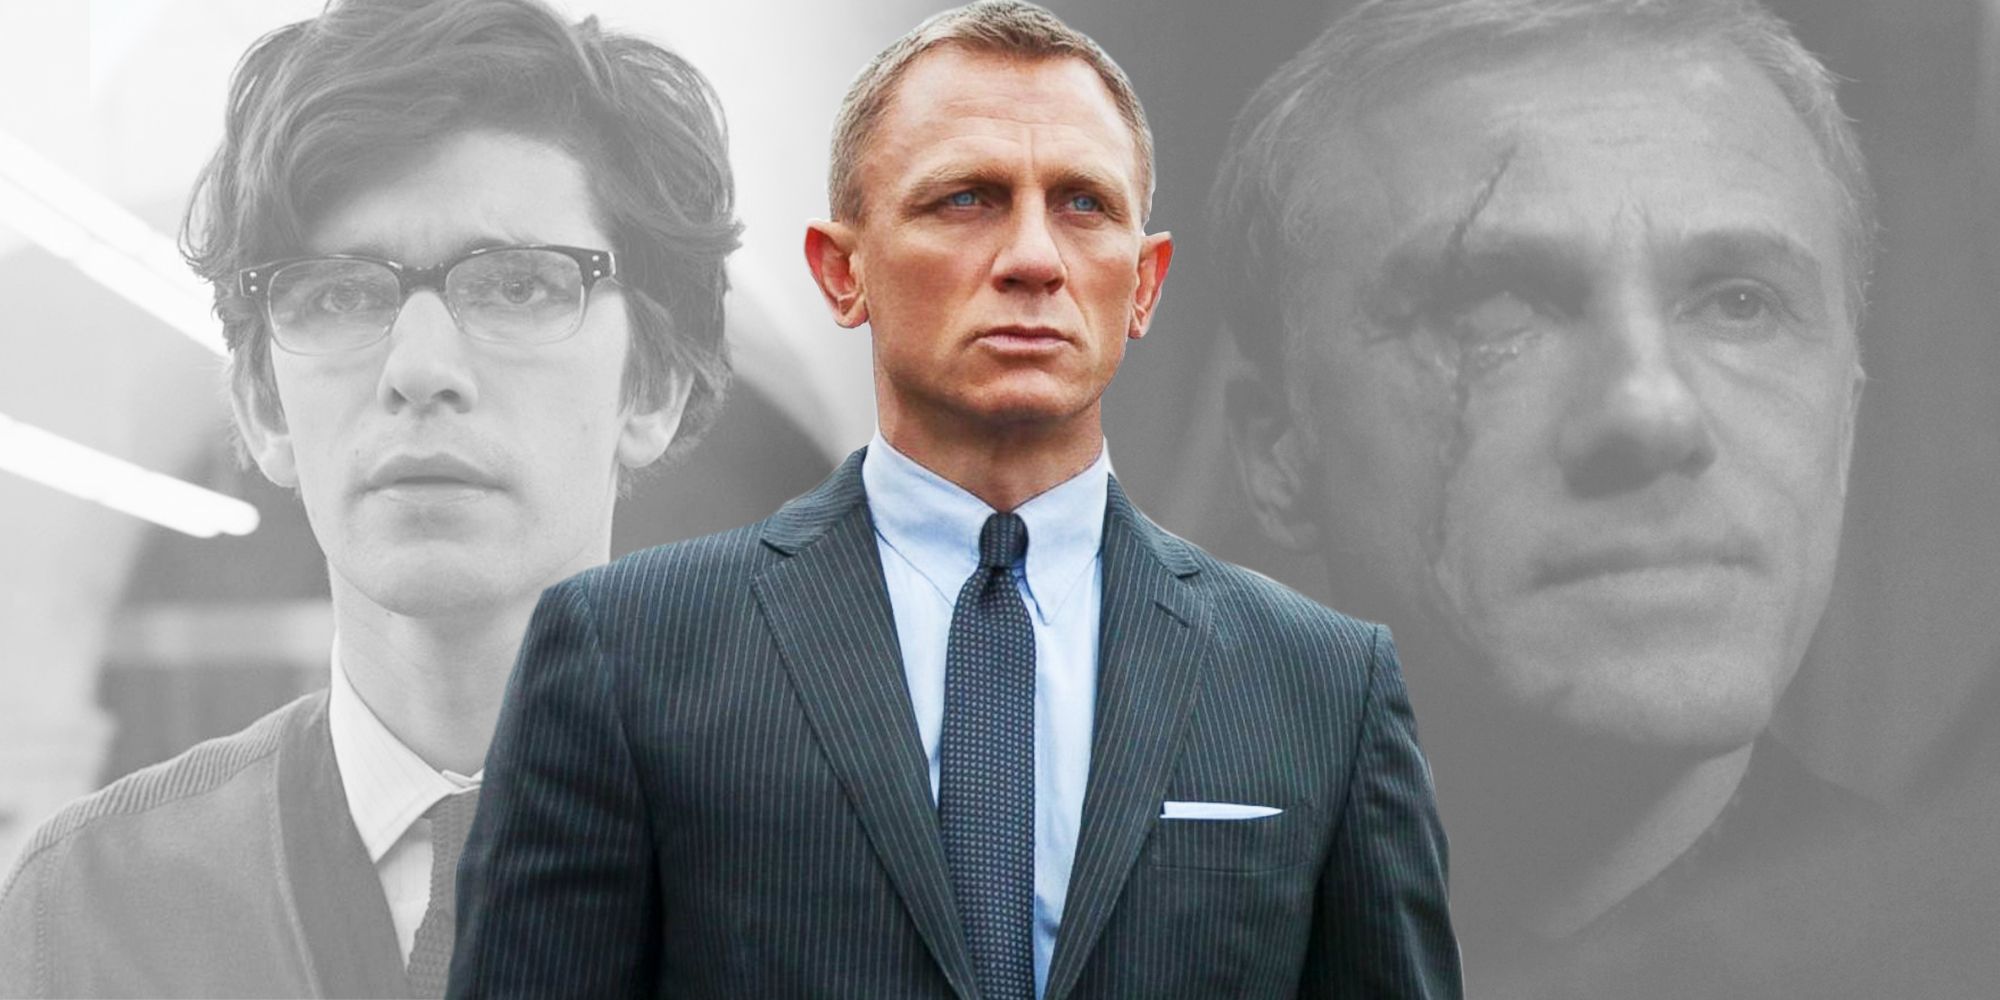 Daniel Craig as James Bond in front of Ben Whishaw as Q and Christoph Waltz as Blofeld